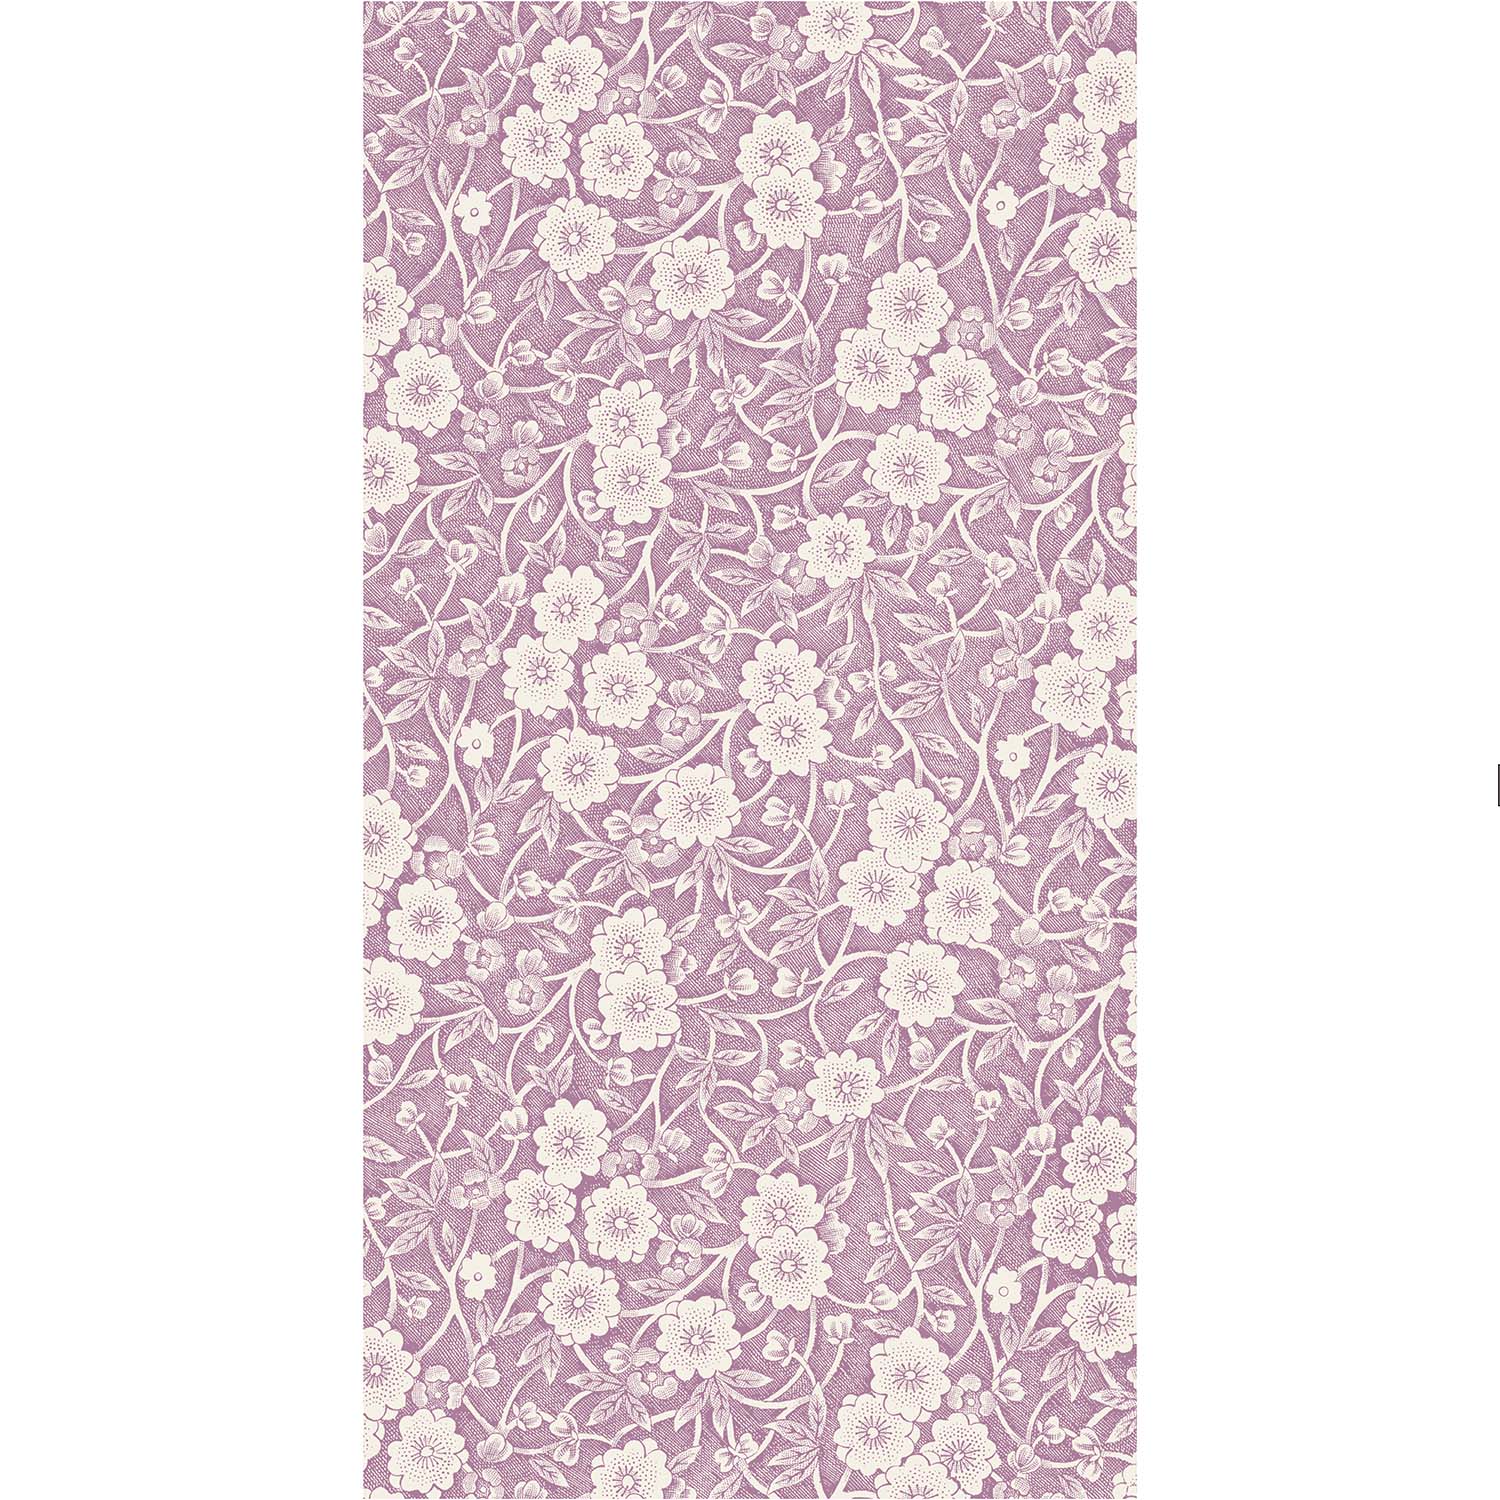 A rectangle guest napkin featuring a dense pattern of white flowers, stems and leaves on a lilac purple background.